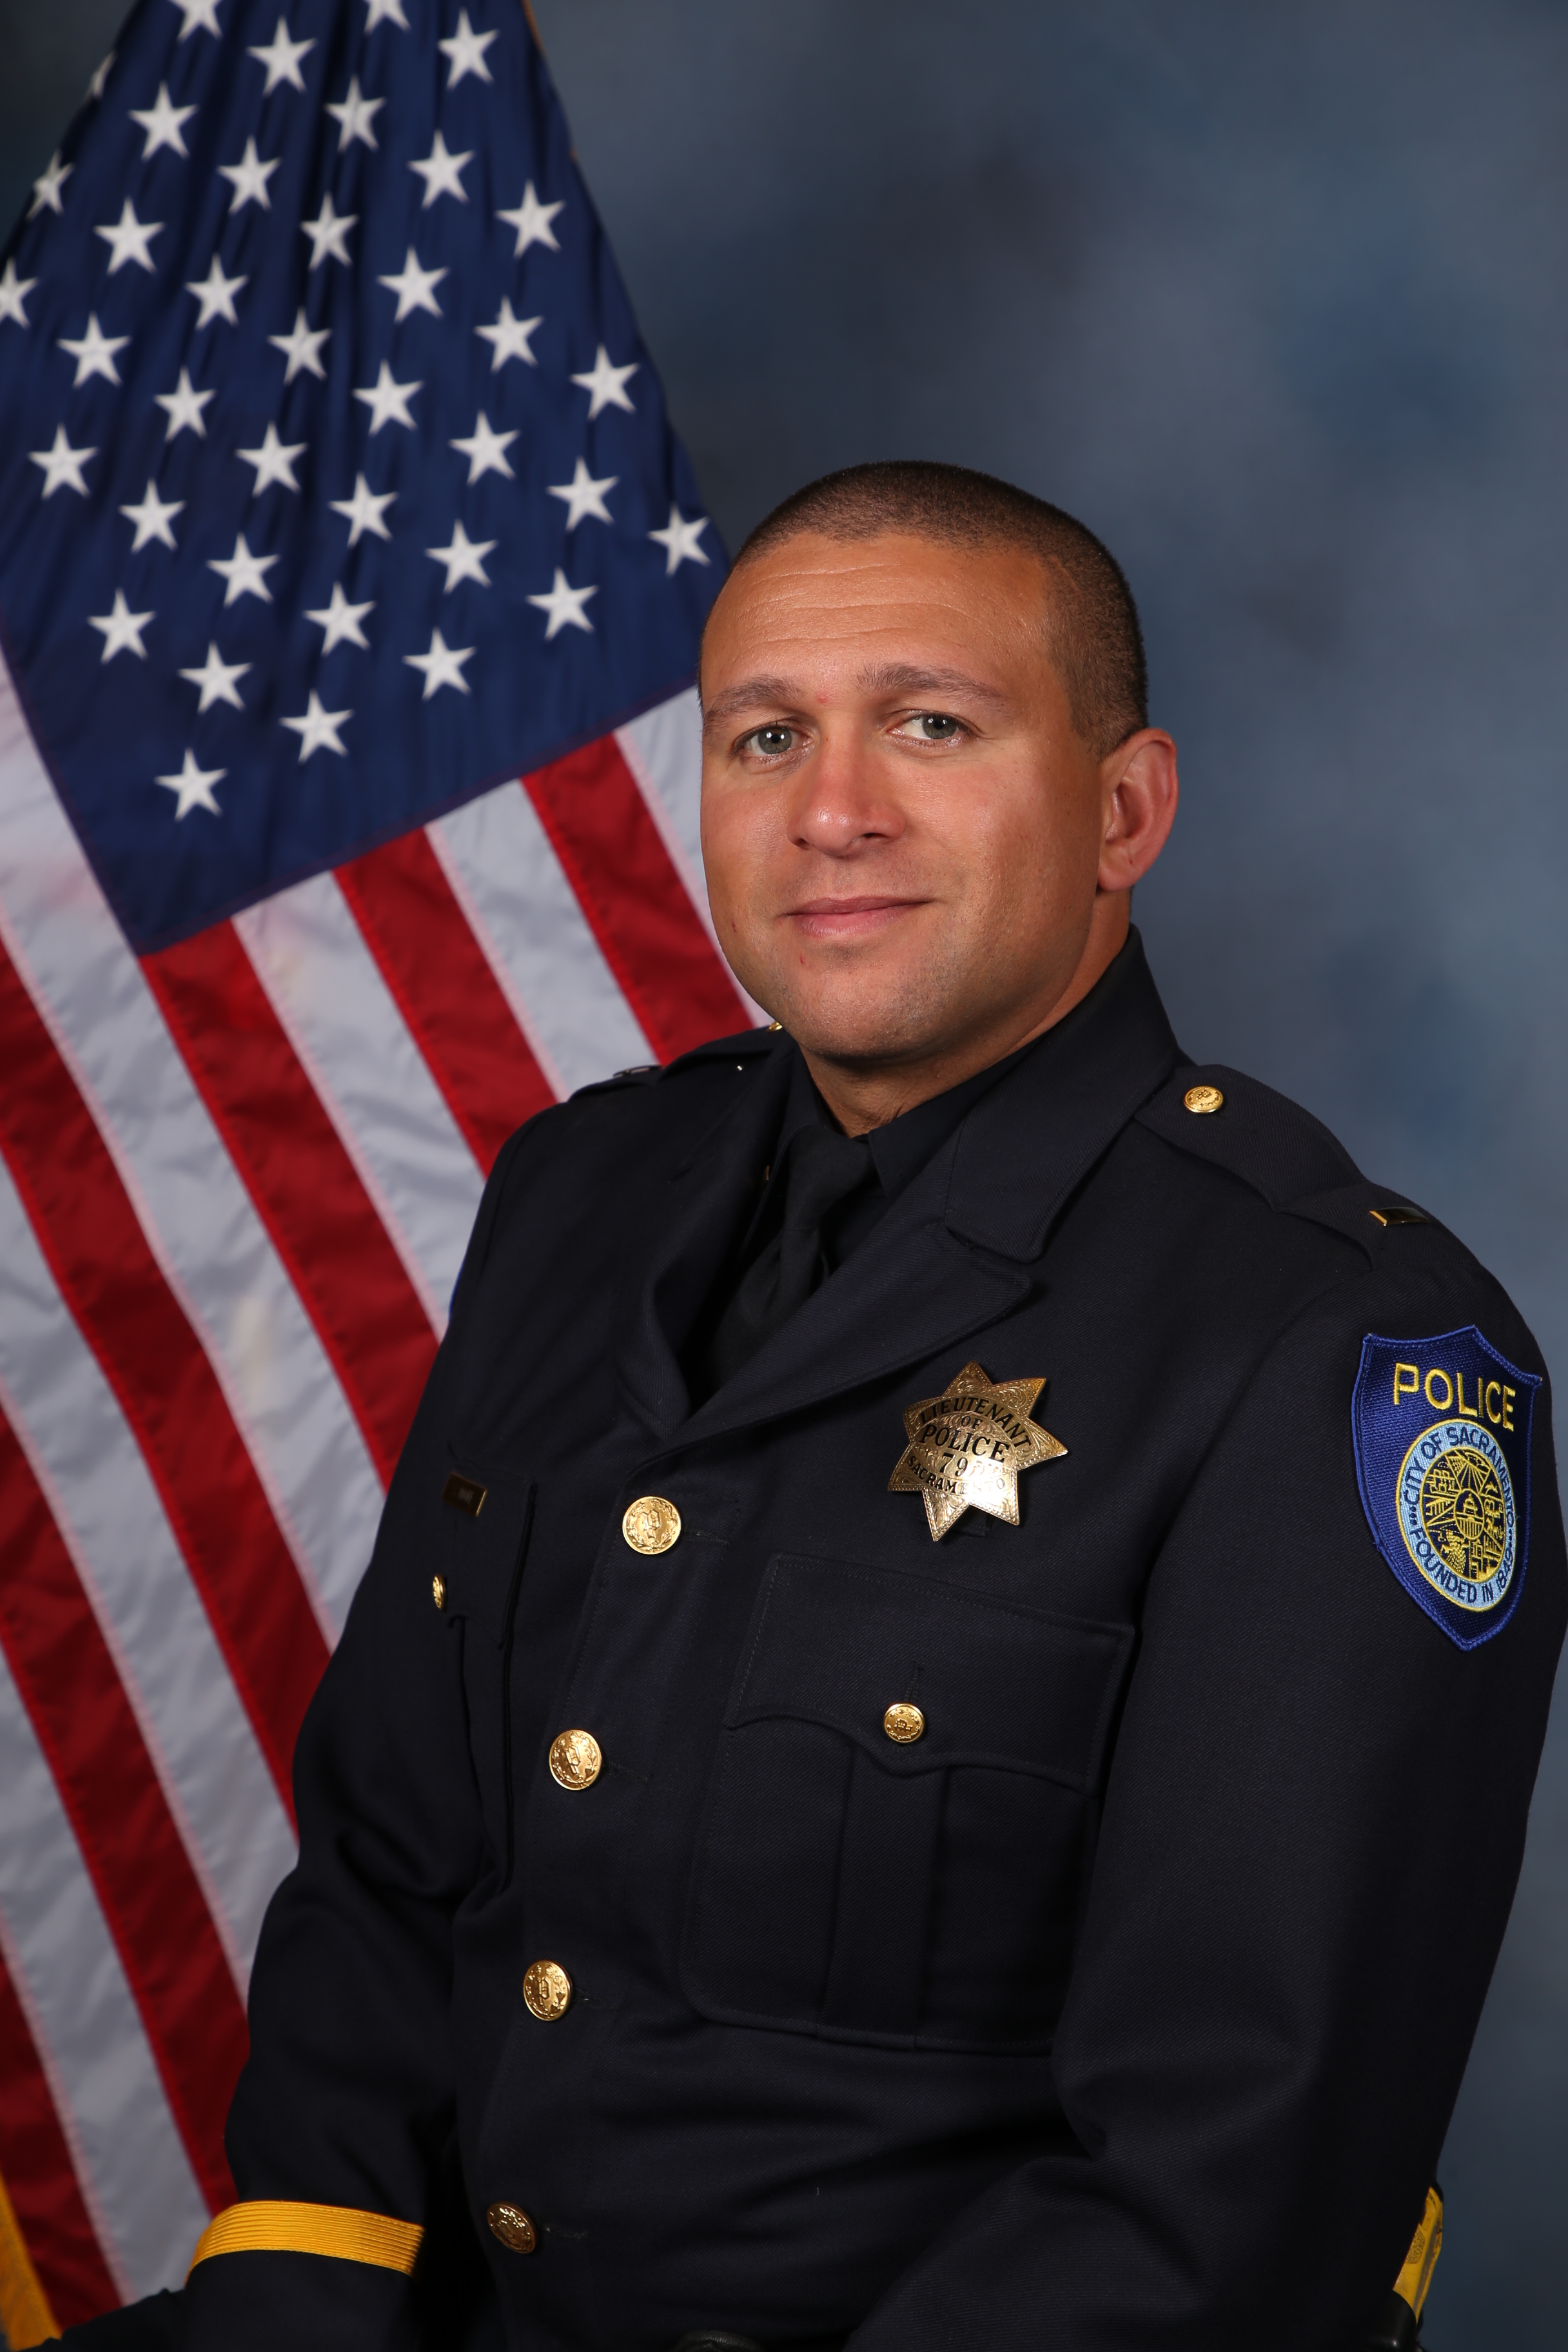 A portrait photo of the Sacramento Police Department Captain Stephen Moore, in full class-A uniform